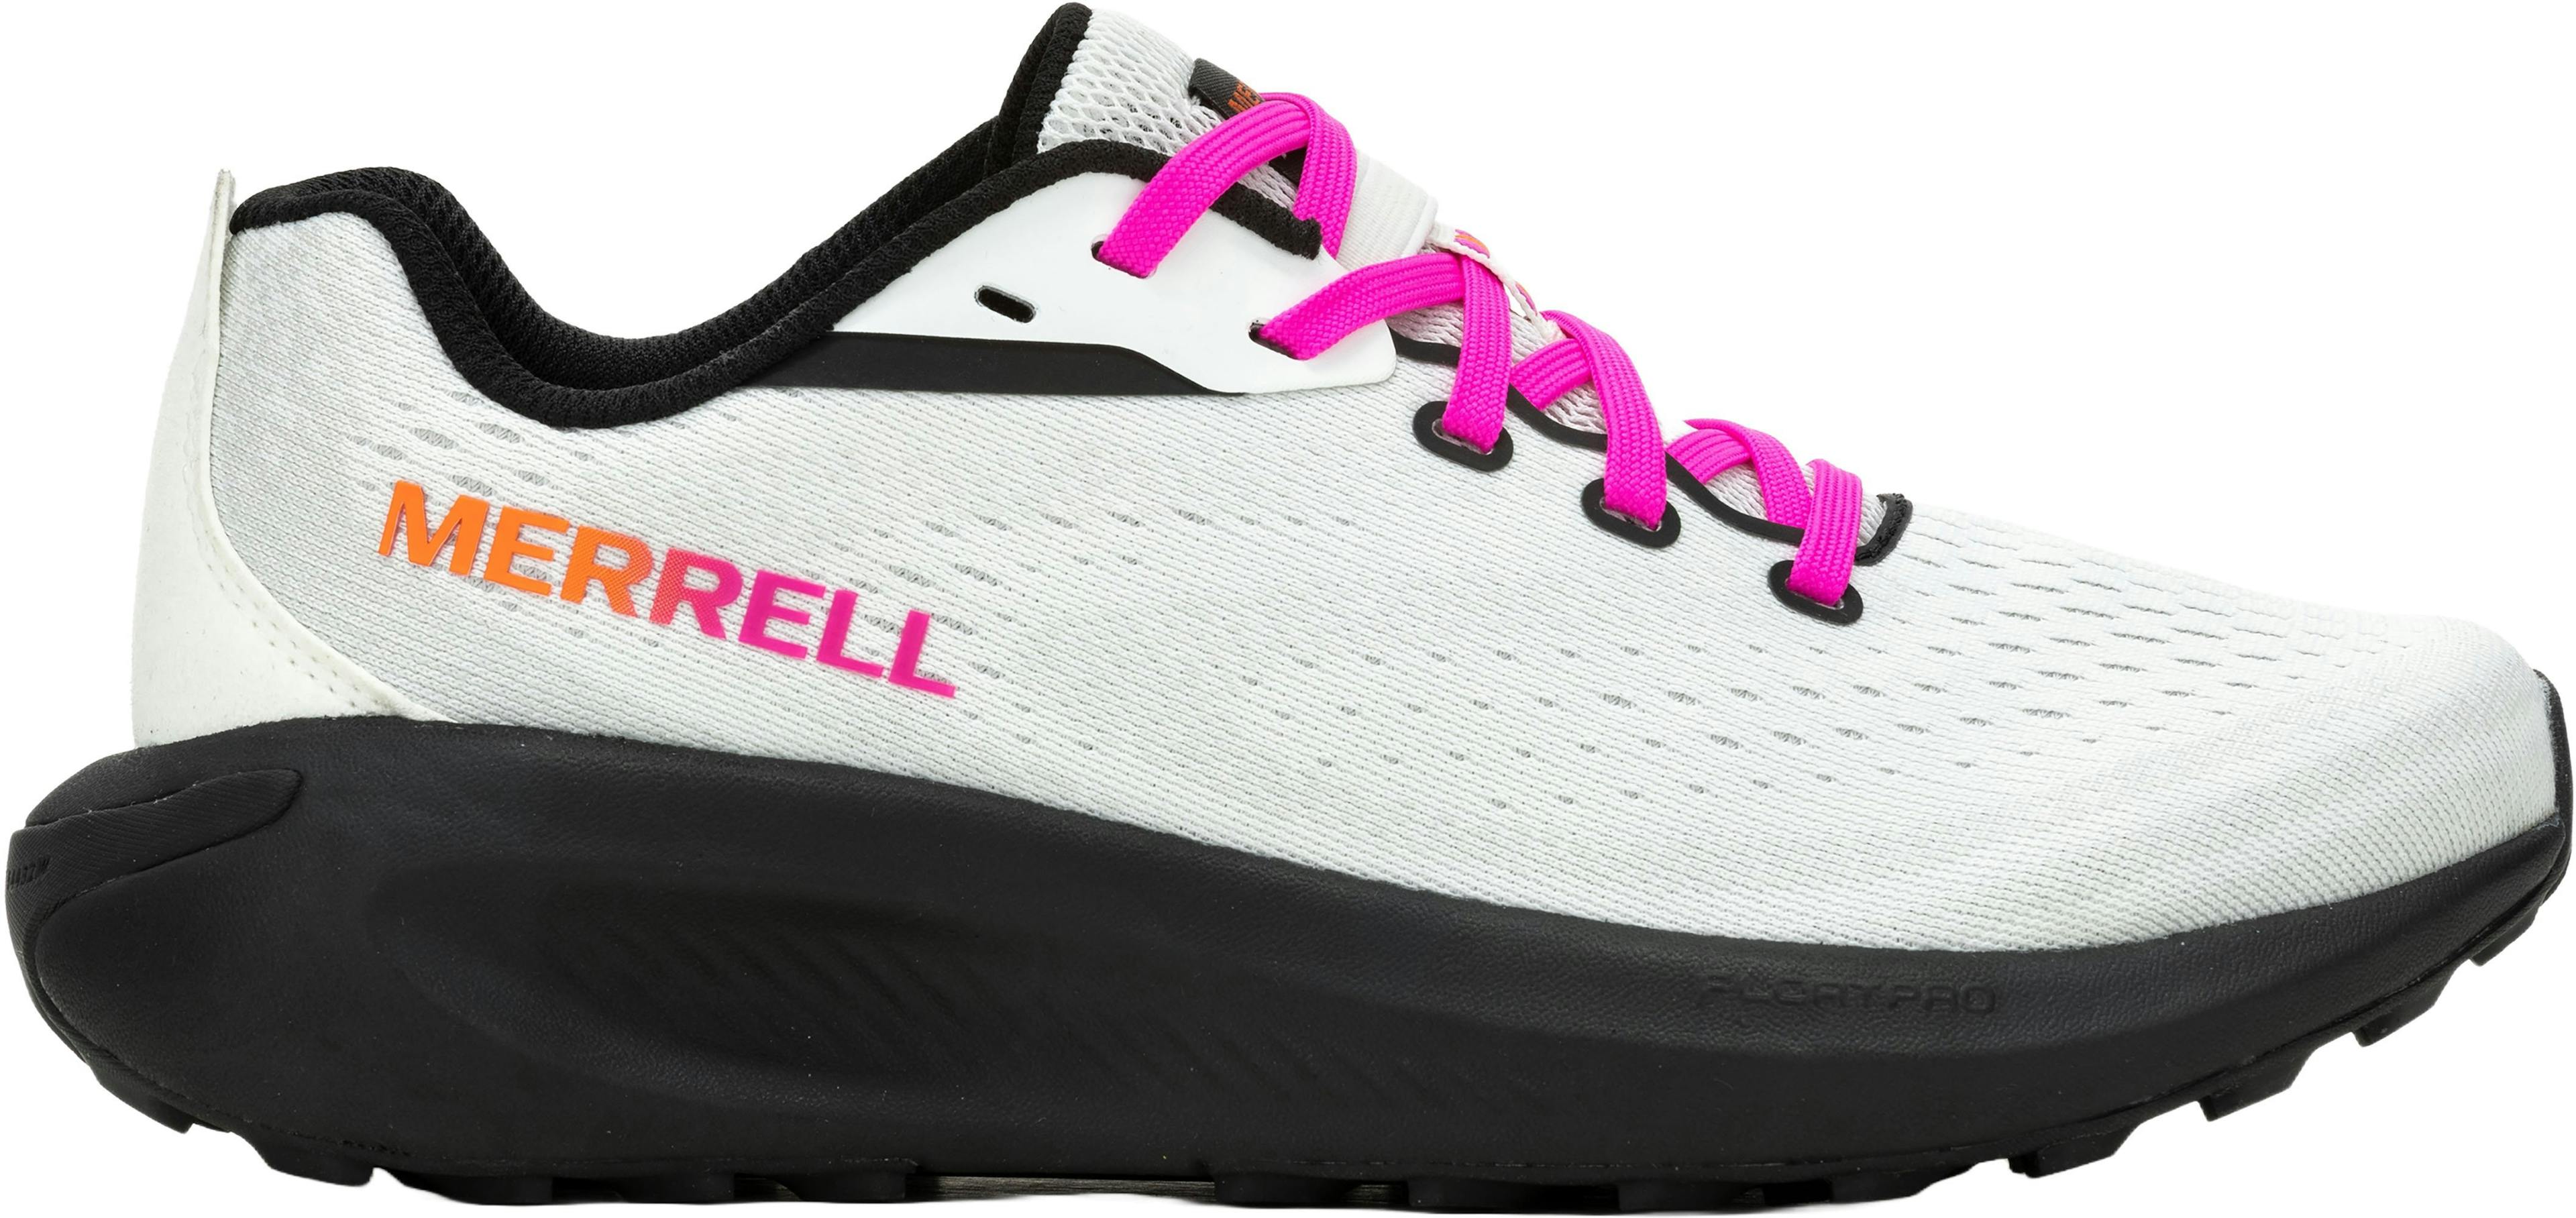 Product image for Morphlite Trail Running Shoes - Women's